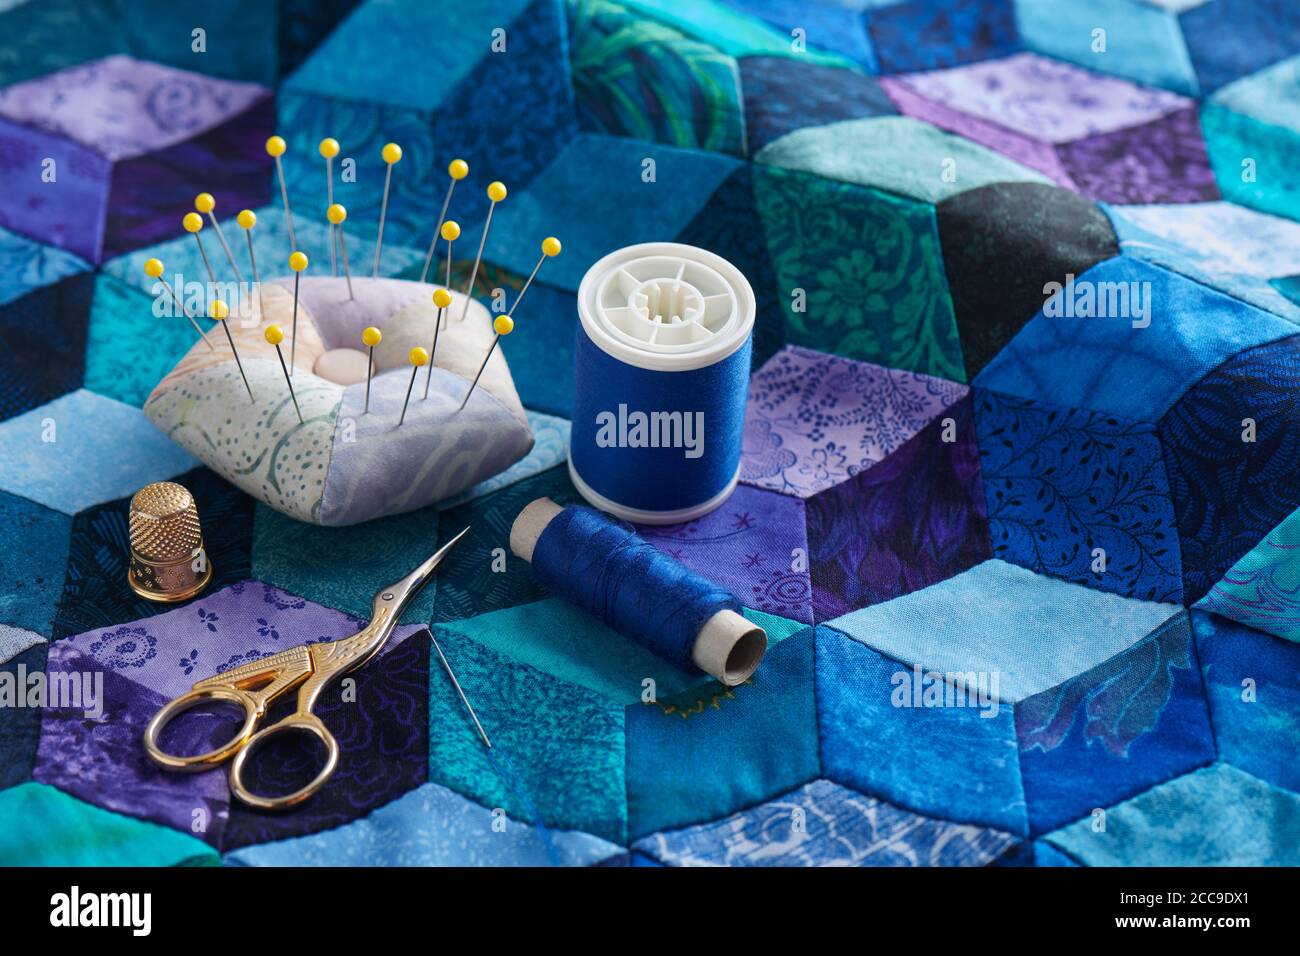 Pincushion, spools of thread, scissors and thimble on the tumbling blocks quilt background Stock Photo